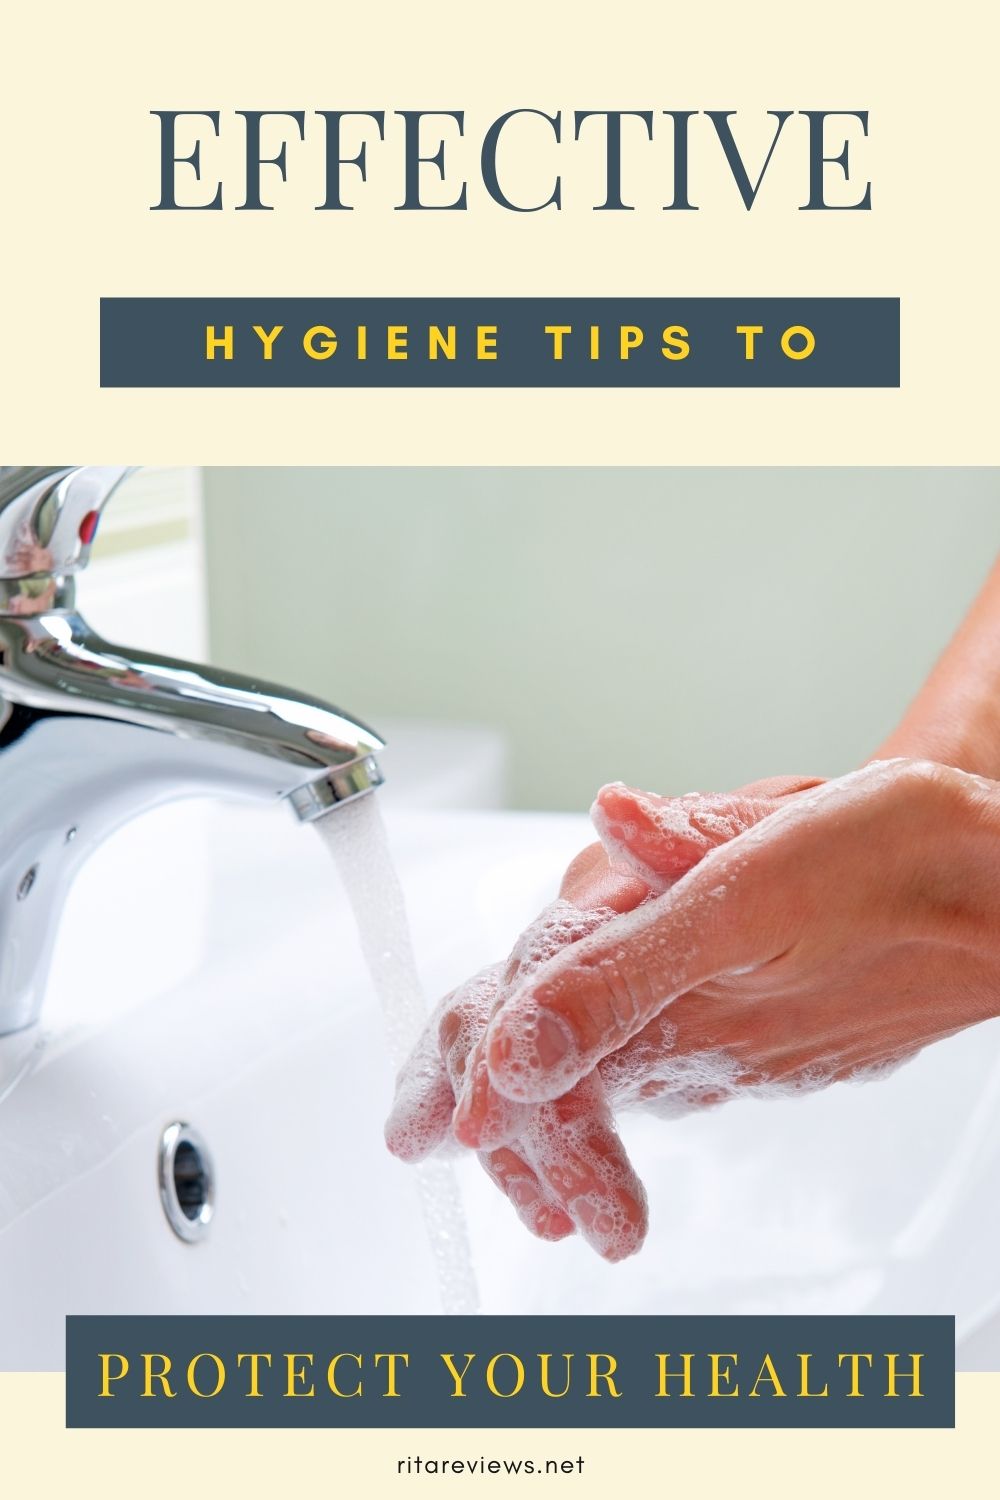 Effective Hygiene Tips To Protect Your Health All-Year Round